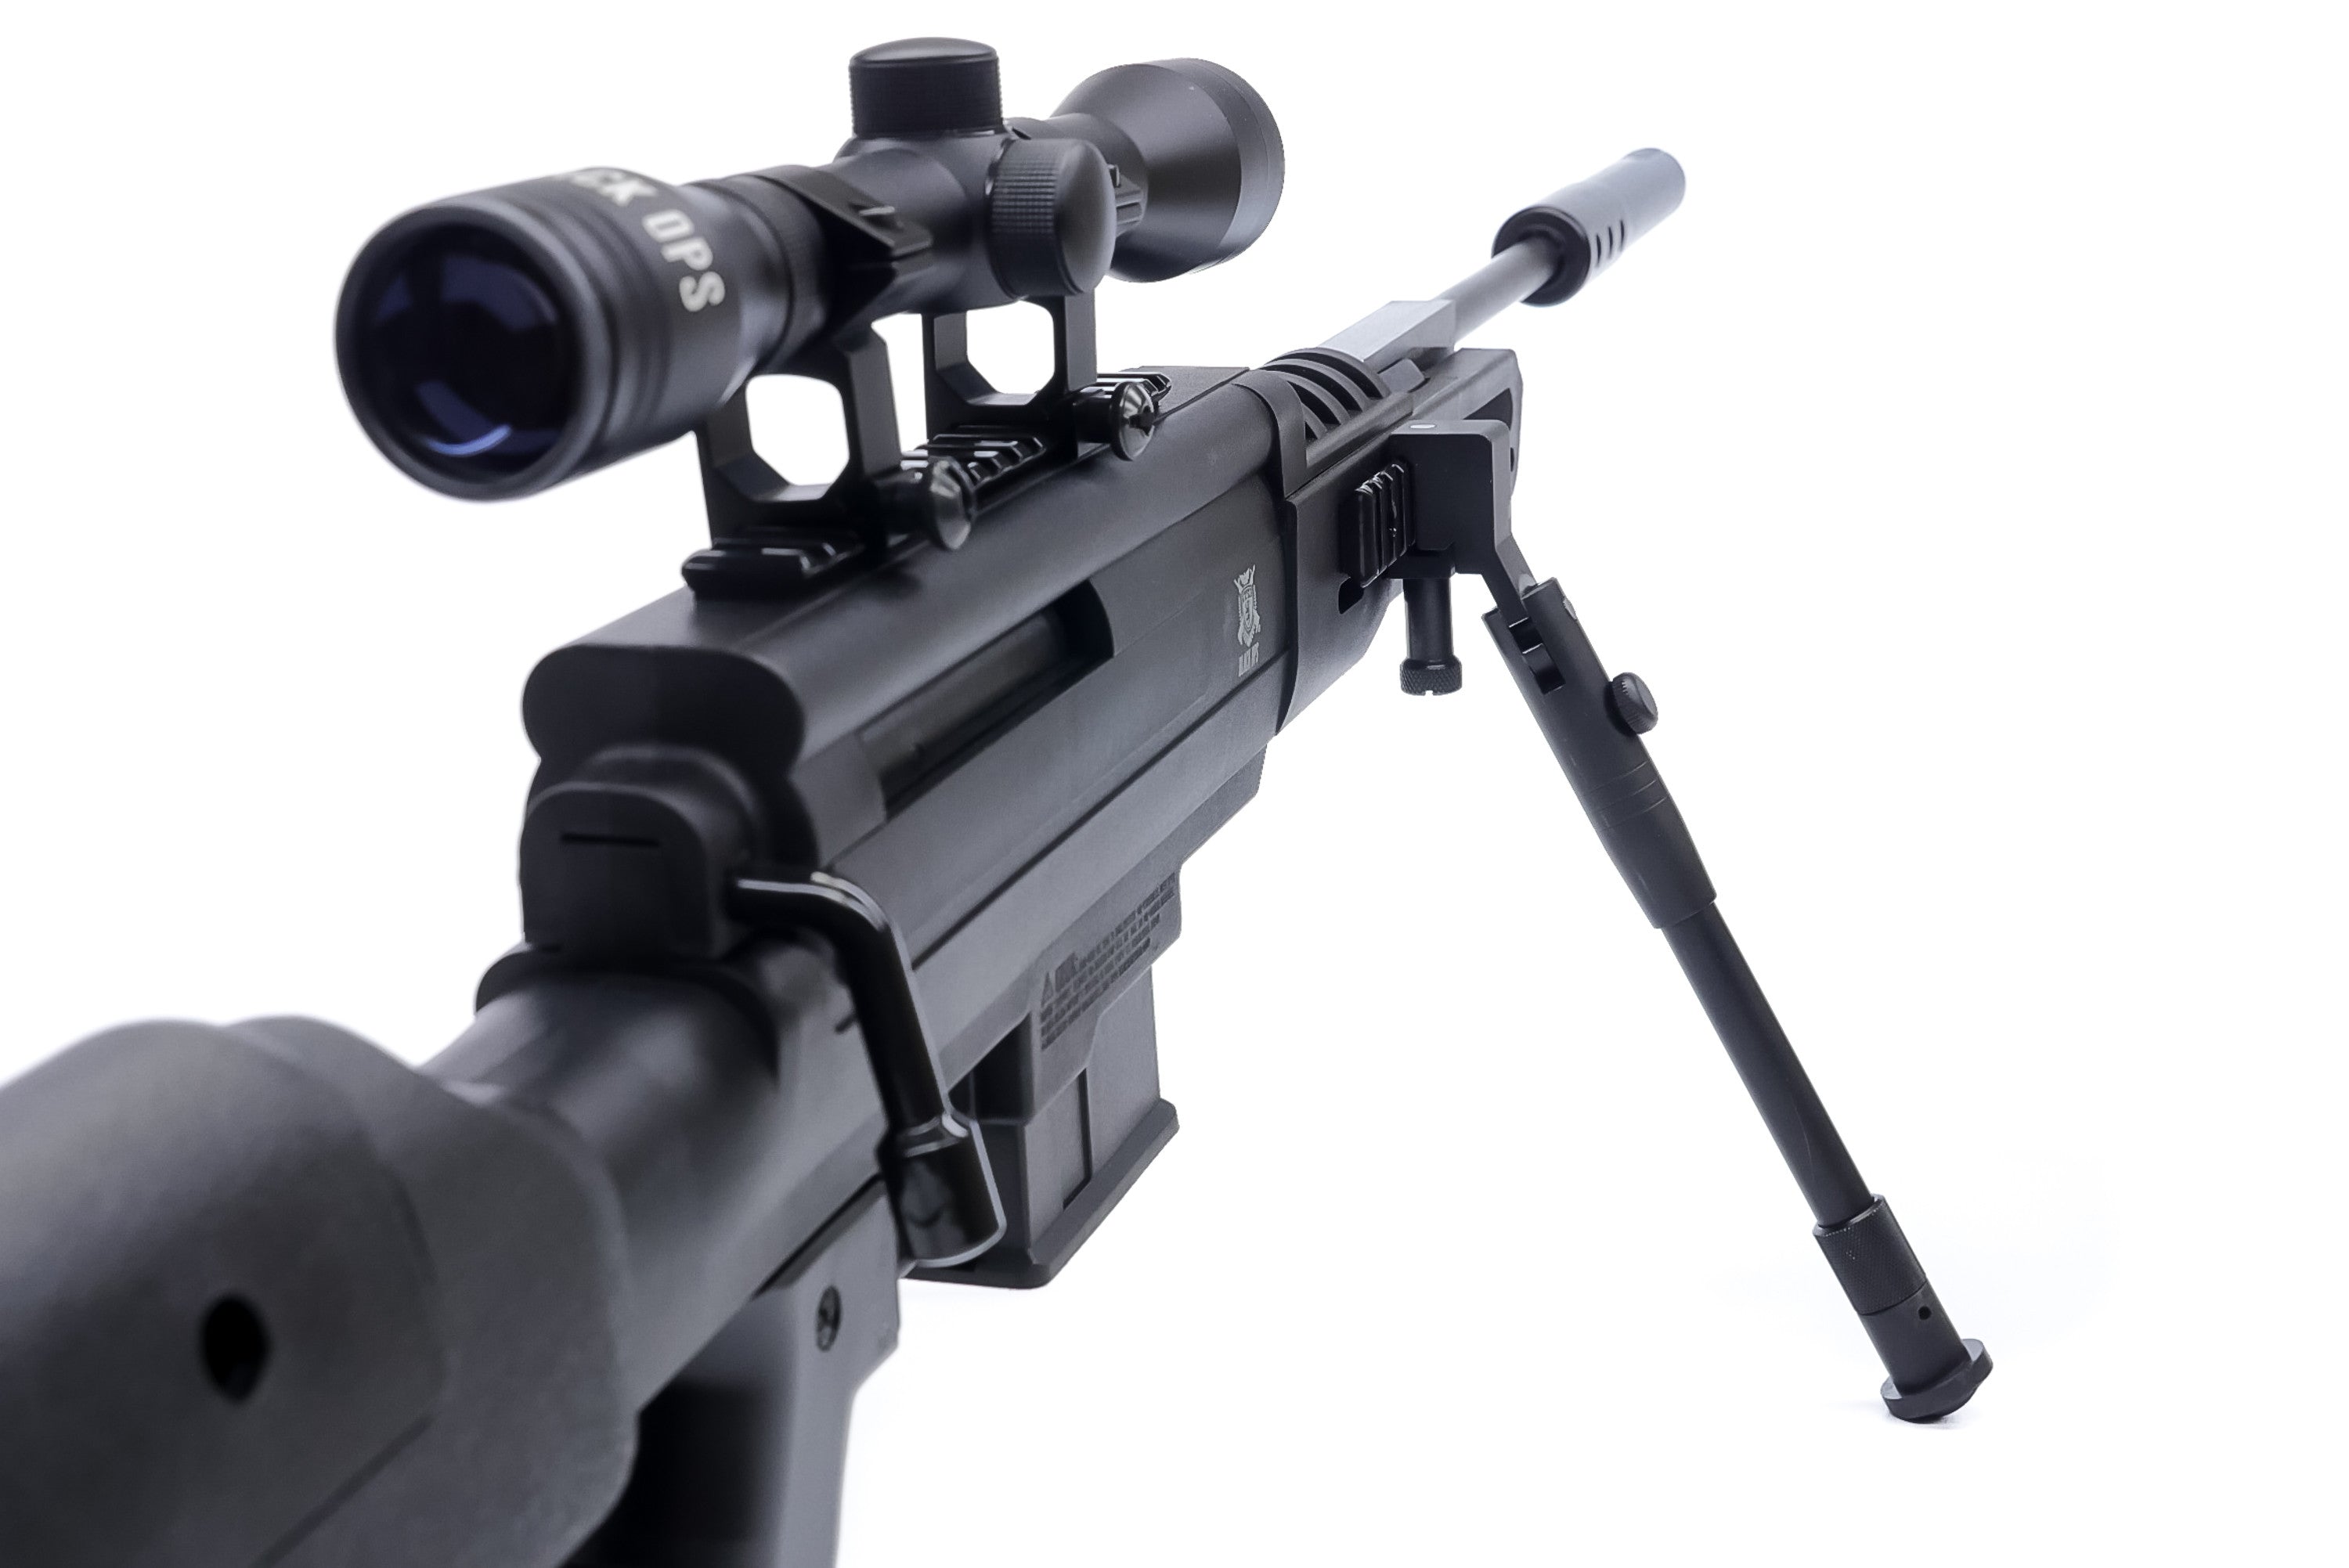 Airsoft Sniper Rifle With Scope And Bipod Black Ops Black Ops Usa